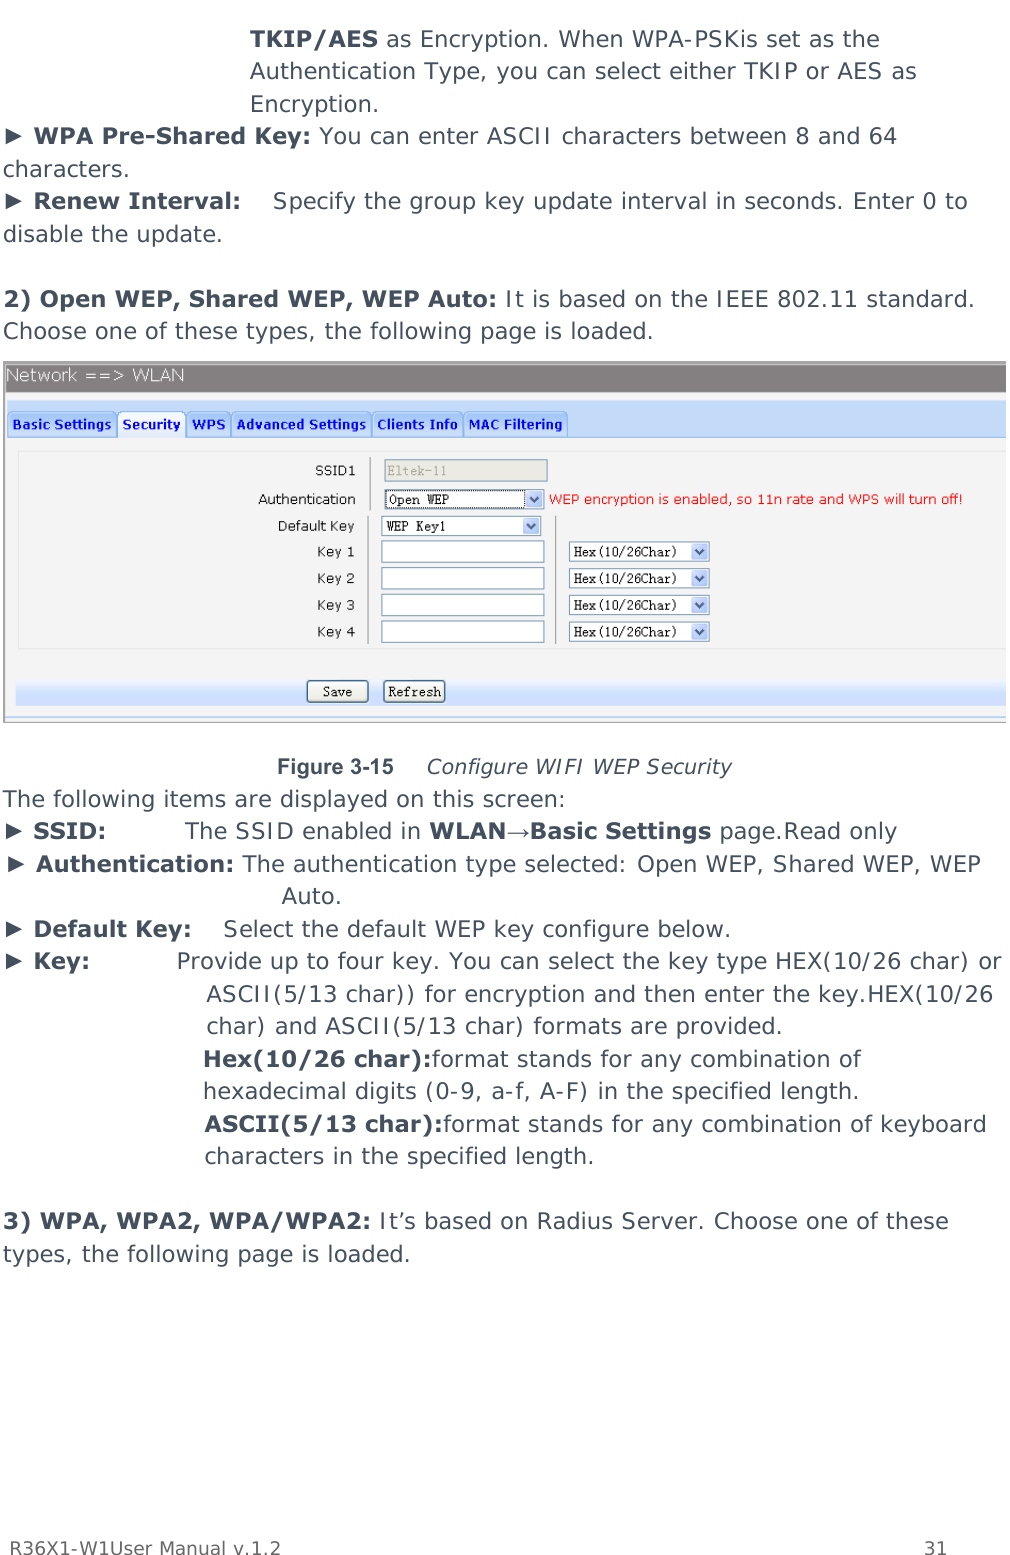           R36X1-W1User Manual v.1.2    31  TKIP/AES as Encryption. When WPA-PSKis set as the Authentication Type, you can select either TKIP or AES as Encryption. ► WPA Pre-Shared Key: You can enter ASCII characters between 8 and 64 characters. ► Renew Interval:    Specify the group key update interval in seconds. Enter 0 to disable the update.  2) Open WEP, Shared WEP, WEP Auto: It is based on the IEEE 802.11 standard. Choose one of these types, the following page is loaded.  Figure 3-15  Configure WIFI WEP Security The following items are displayed on this screen: ► SSID:          The SSID enabled in WLAN→Basic Settings page.Read only ► Authentication: The authentication type selected: Open WEP, Shared WEP, WEP Auto. ► Default Key:    Select the default WEP key configure below. ► Key:           Provide up to four key. You can select the key type HEX(10/26 char) or ASCII(5/13 char)) for encryption and then enter the key.HEX(10/26 char) and ASCII(5/13 char) formats are provided.  Hex(10/26 char):format stands for any combination of hexadecimal digits (0-9, a-f, A-F) in the specified length. ASCII(5/13 char):format stands for any combination of keyboard characters in the specified length.  3) WPA, WPA2, WPA/WPA2: It’s based on Radius Server. Choose one of these types, the following page is loaded. 